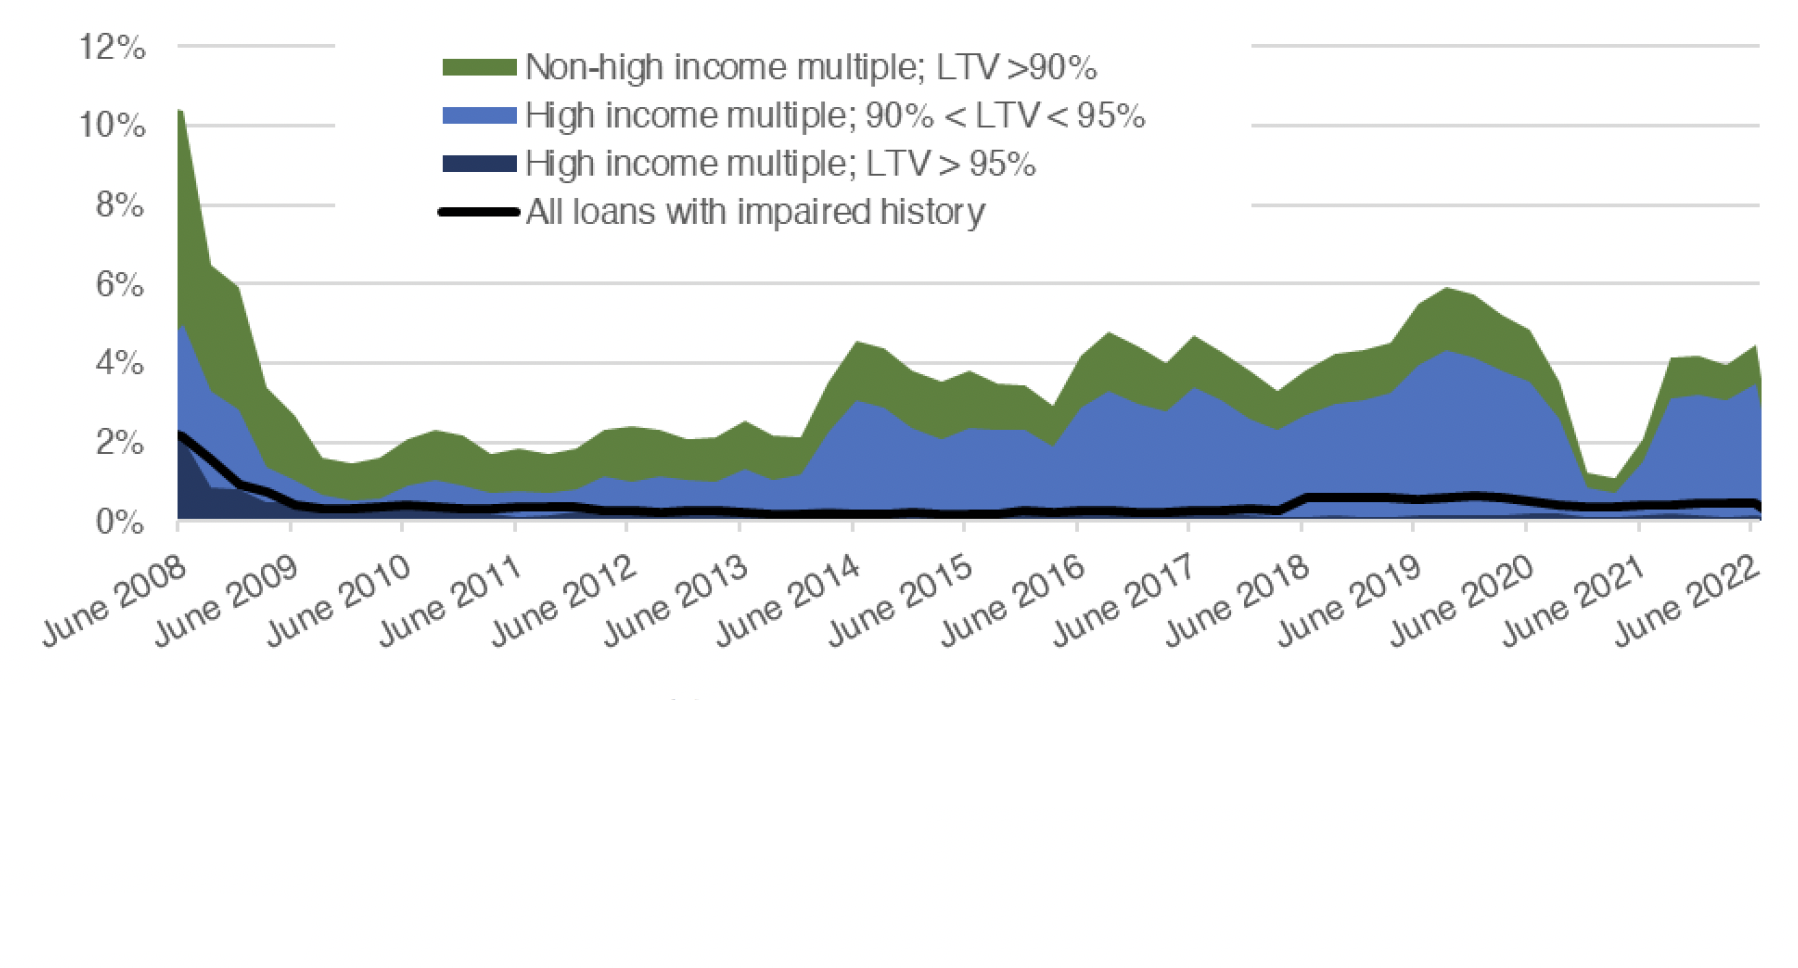 Chart 5.4 outlines how higher risk lending as a percentage of all residential lending has changed since Q2 2008 to Q2 2022. These categories are split into lending with a LTV ratio above 90% but the loan-to-income (“LTI”) ratio is not high, a LTV between 90% and 95% and a high LTI ratio, a LTV above 95% and a high LTI ratio and finally loans with an impaired history. 